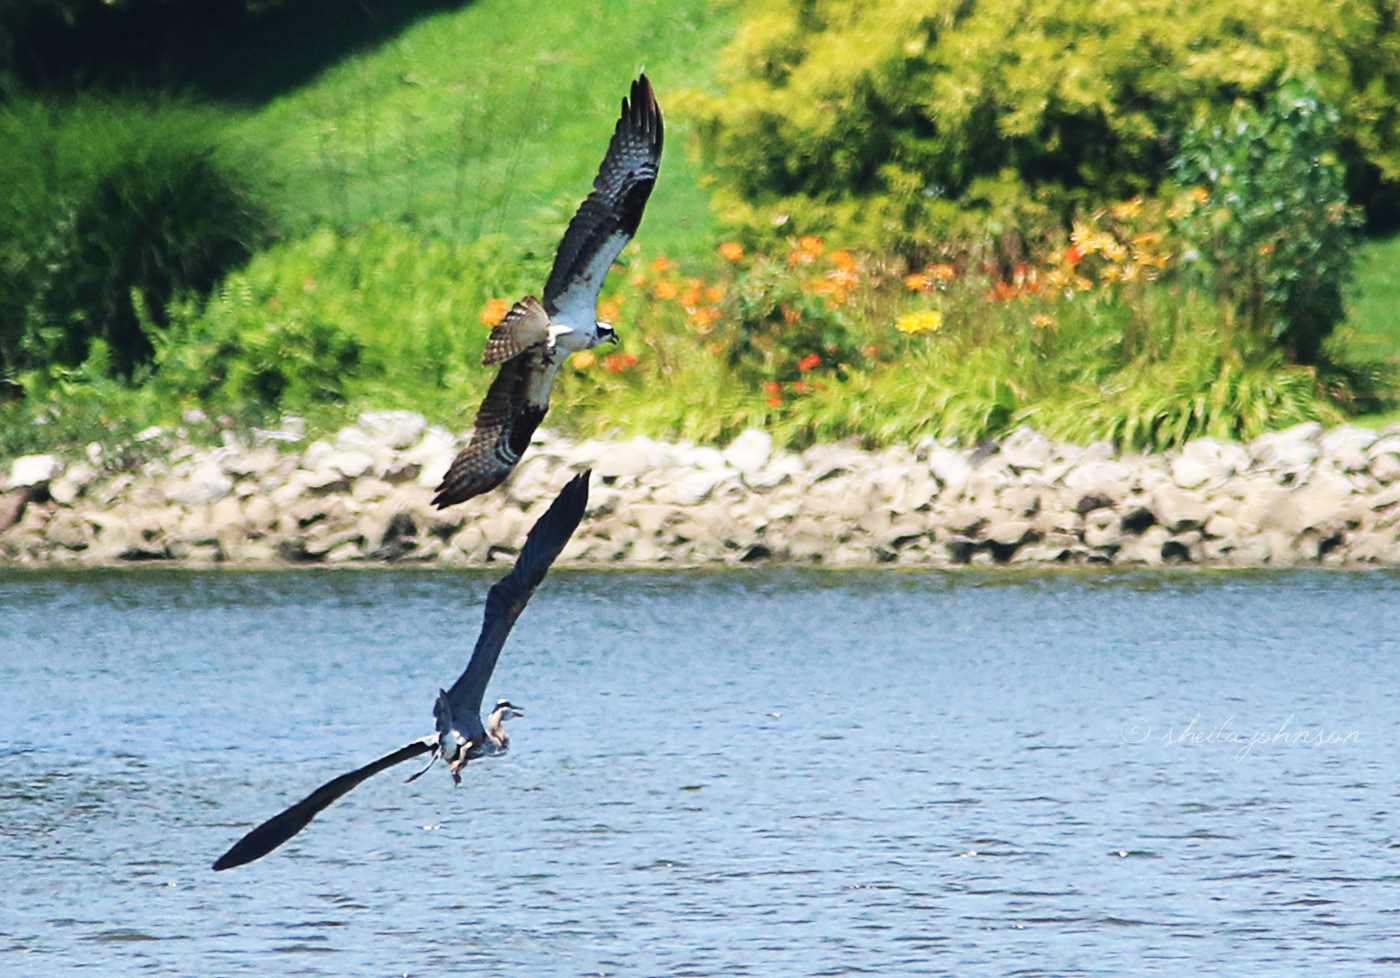 This Mama Osprey, A Fierce Defender Of Her Nest Against Me Just Sitting On The Dock Nearby, Will Not Tolerate This Great Blue Heron In Her Airspace.